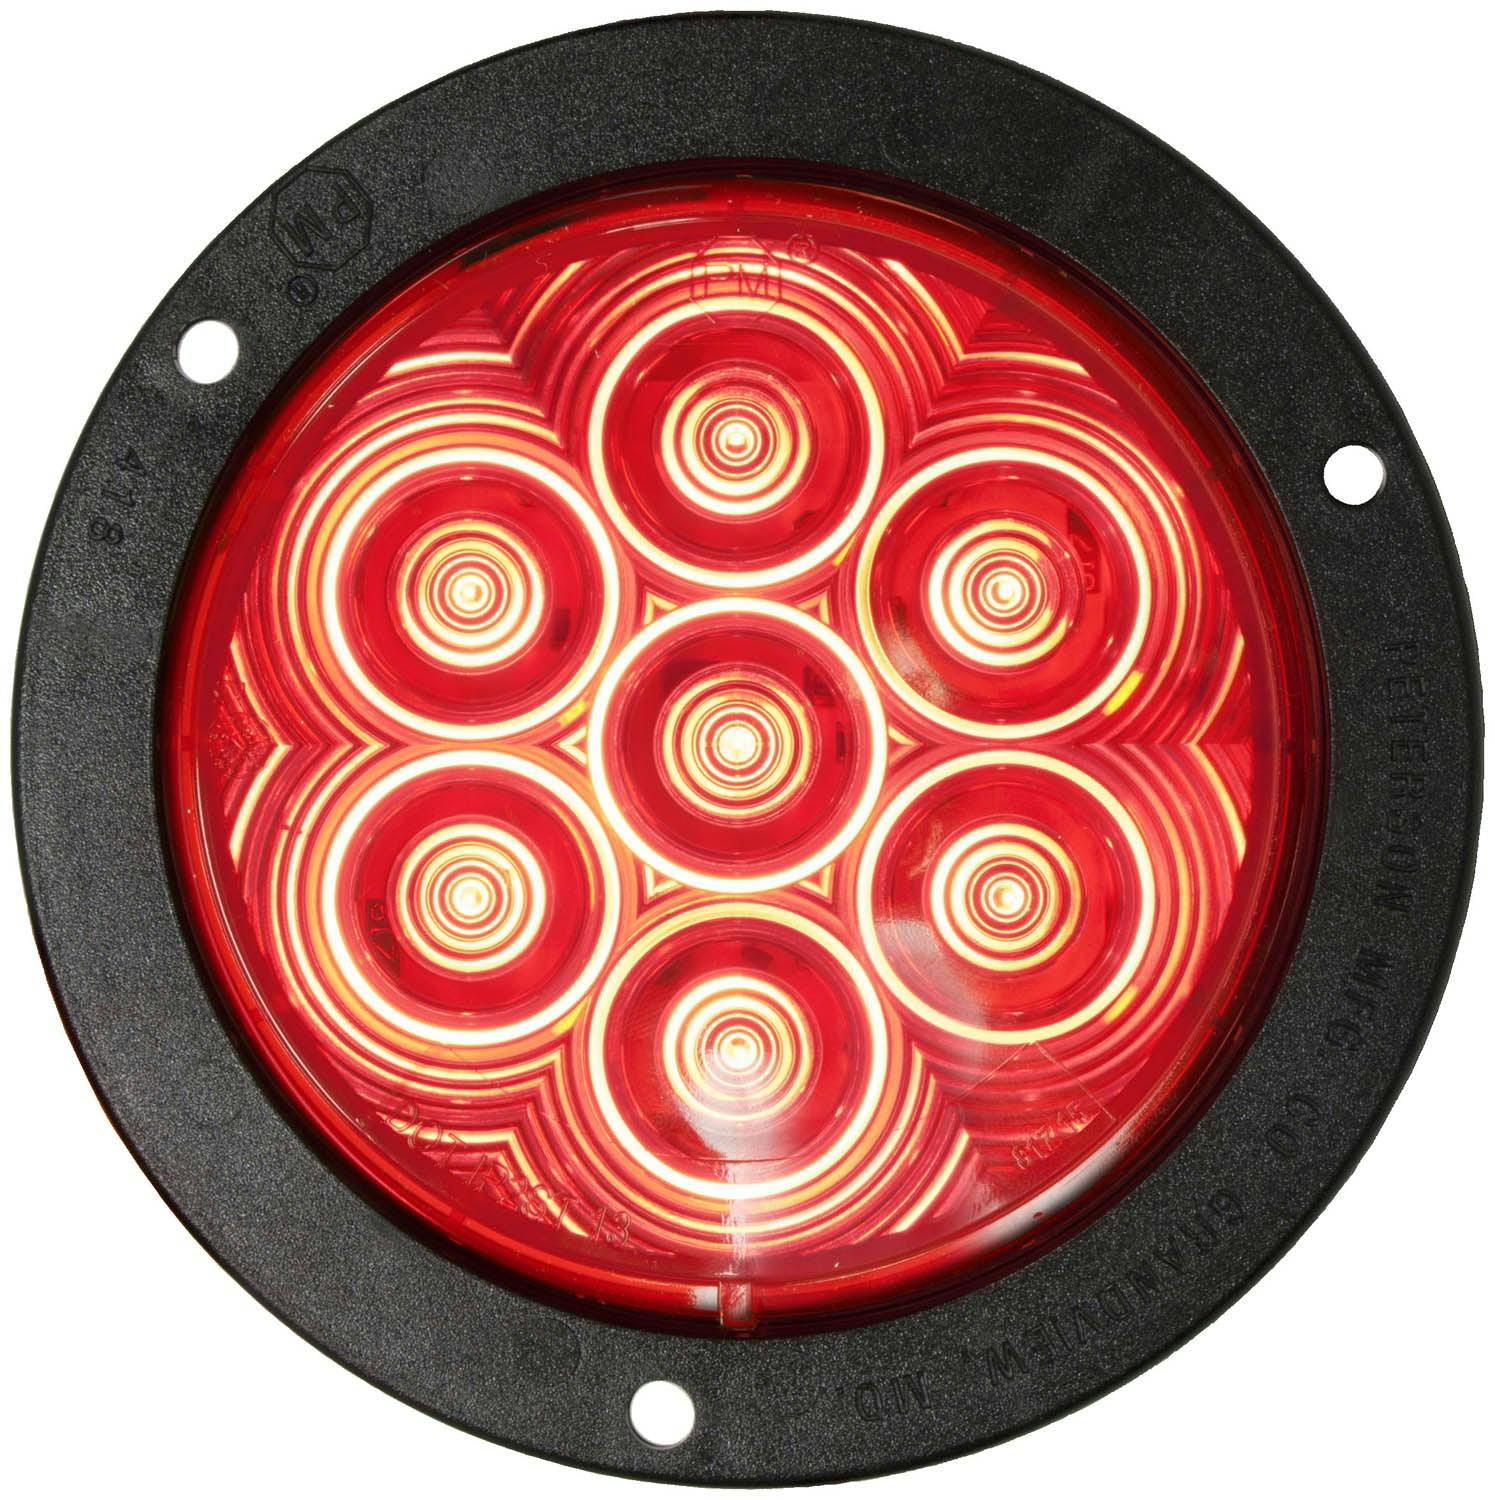 LED Stop/Turn/Tail, Round, AMP, Flange-Mount 4", red, bulk pack (Pack of 50) - 818R-7_1d5b88ab-a3bb-43cd-8c36-3a52bdd4168e